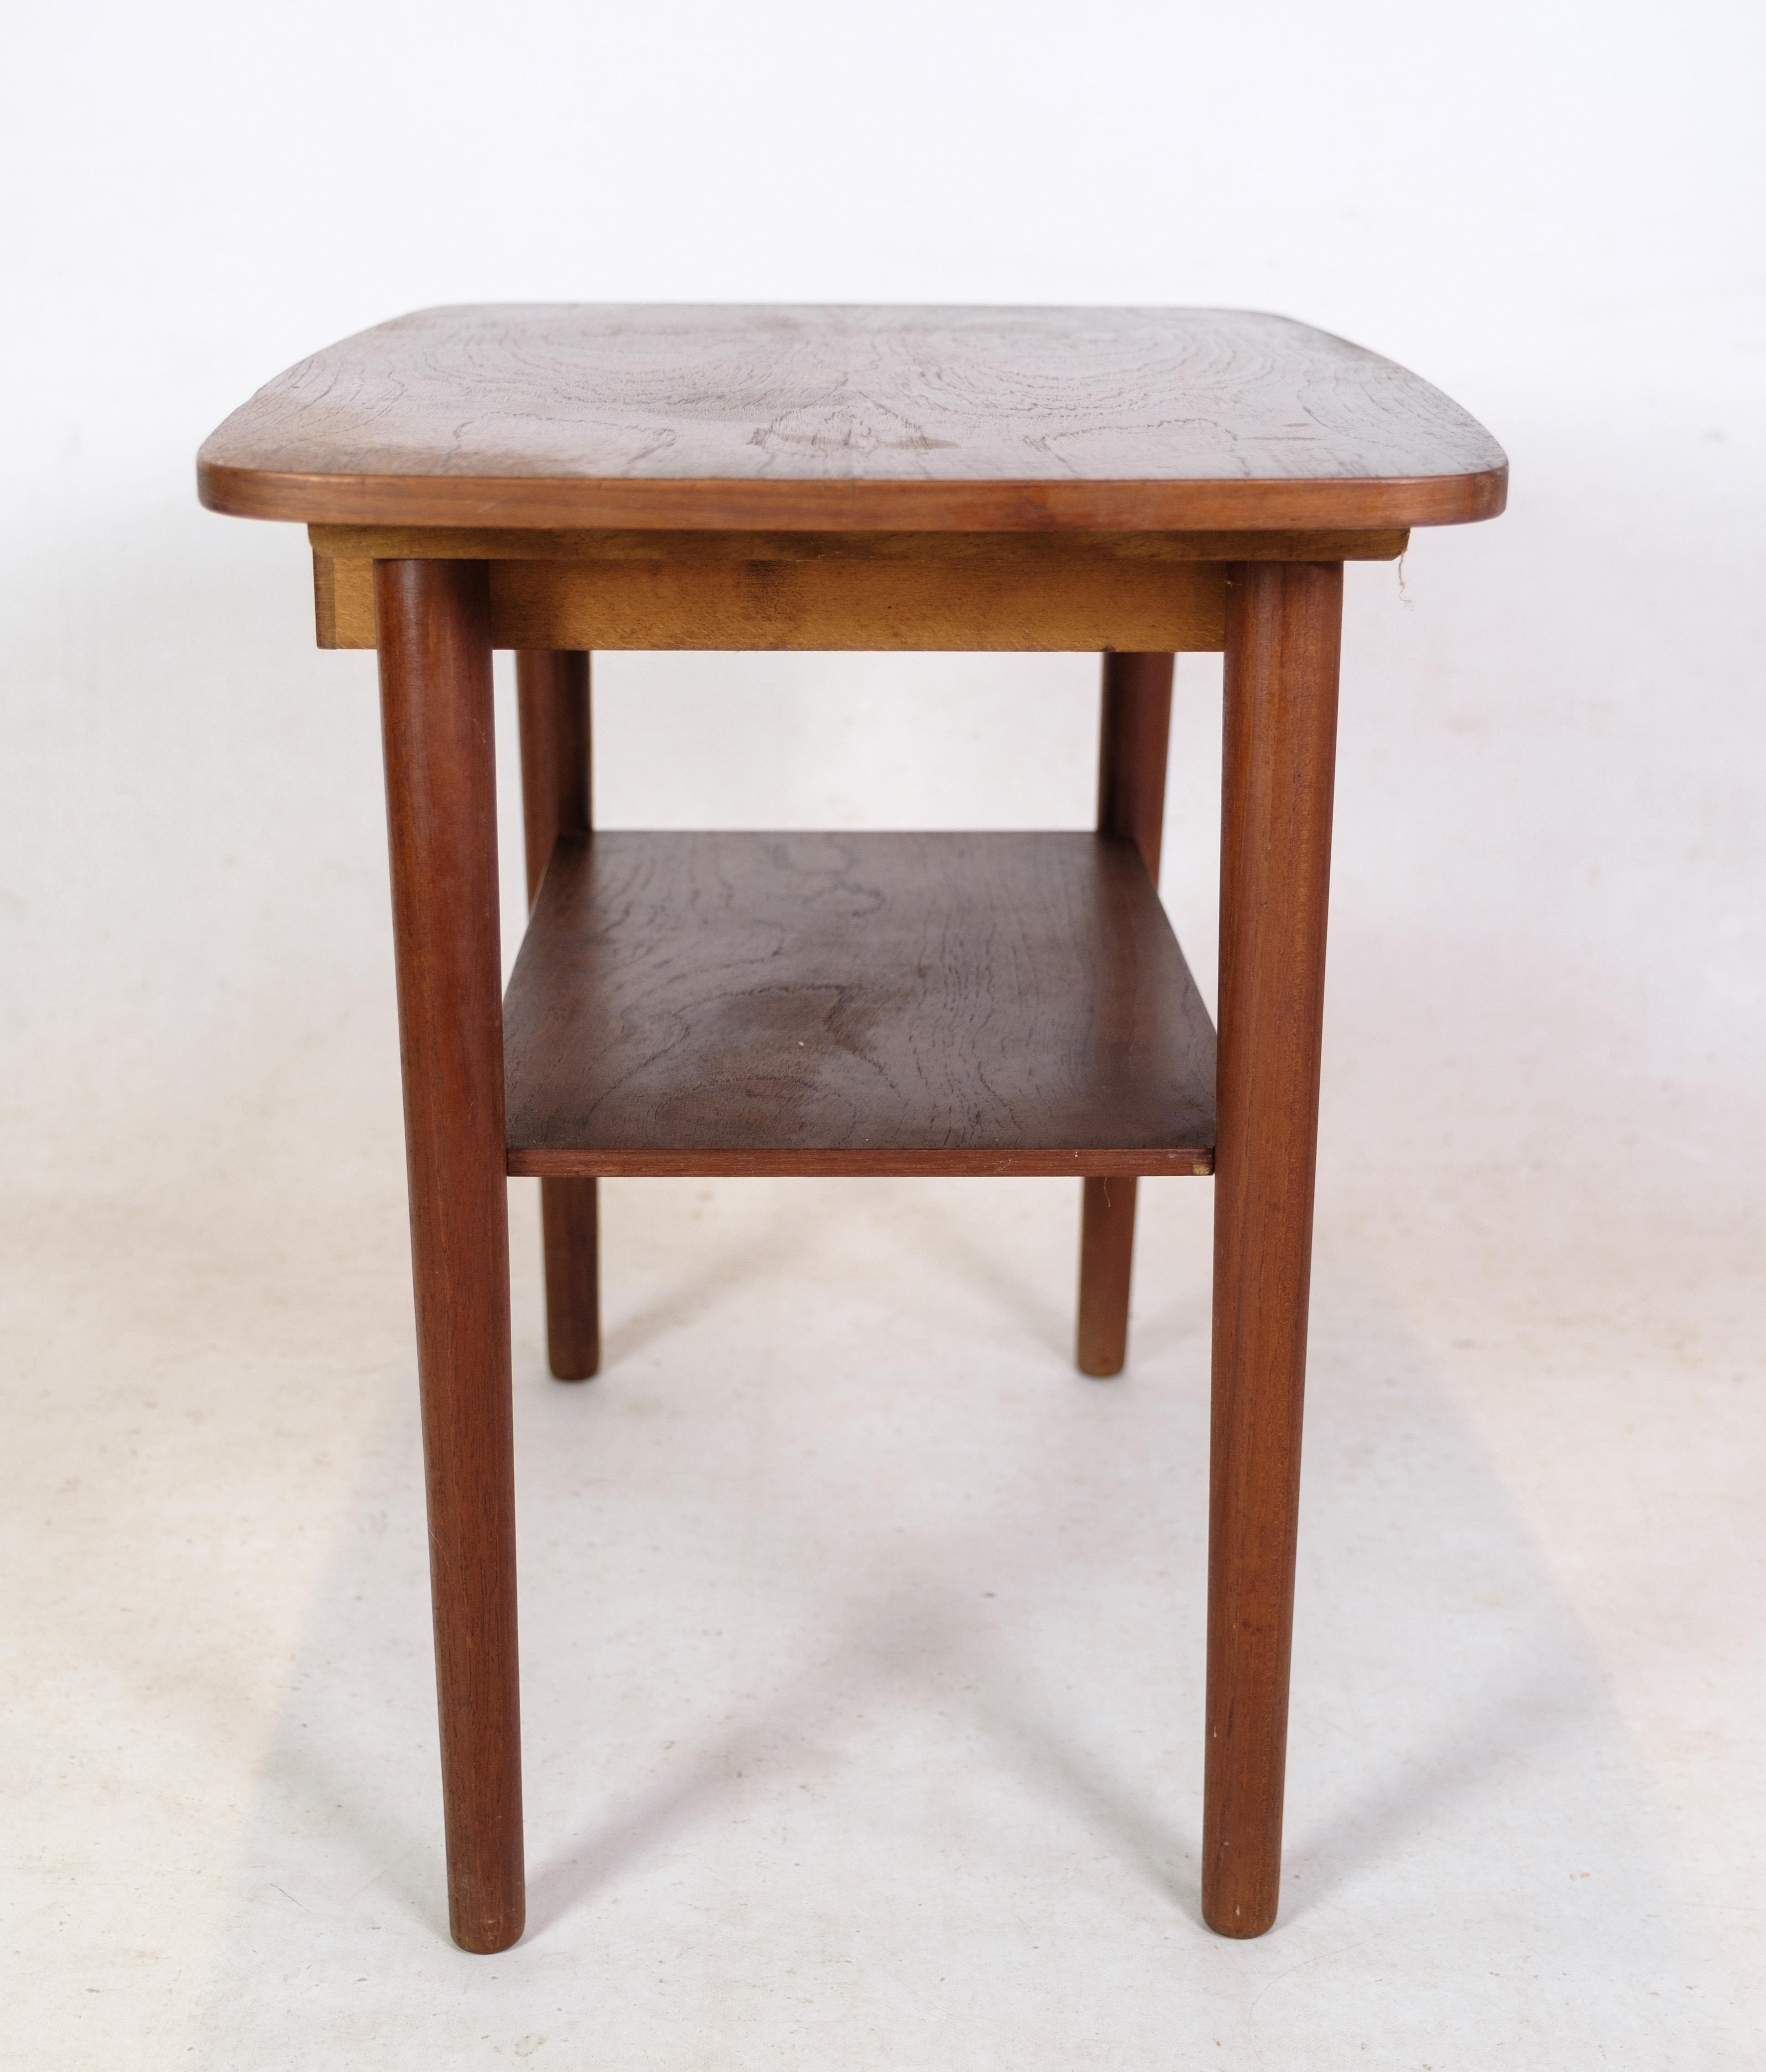 Side Table with Drawer and Shelf in Teak Wood of Danish Design from 1960's For Sale 1